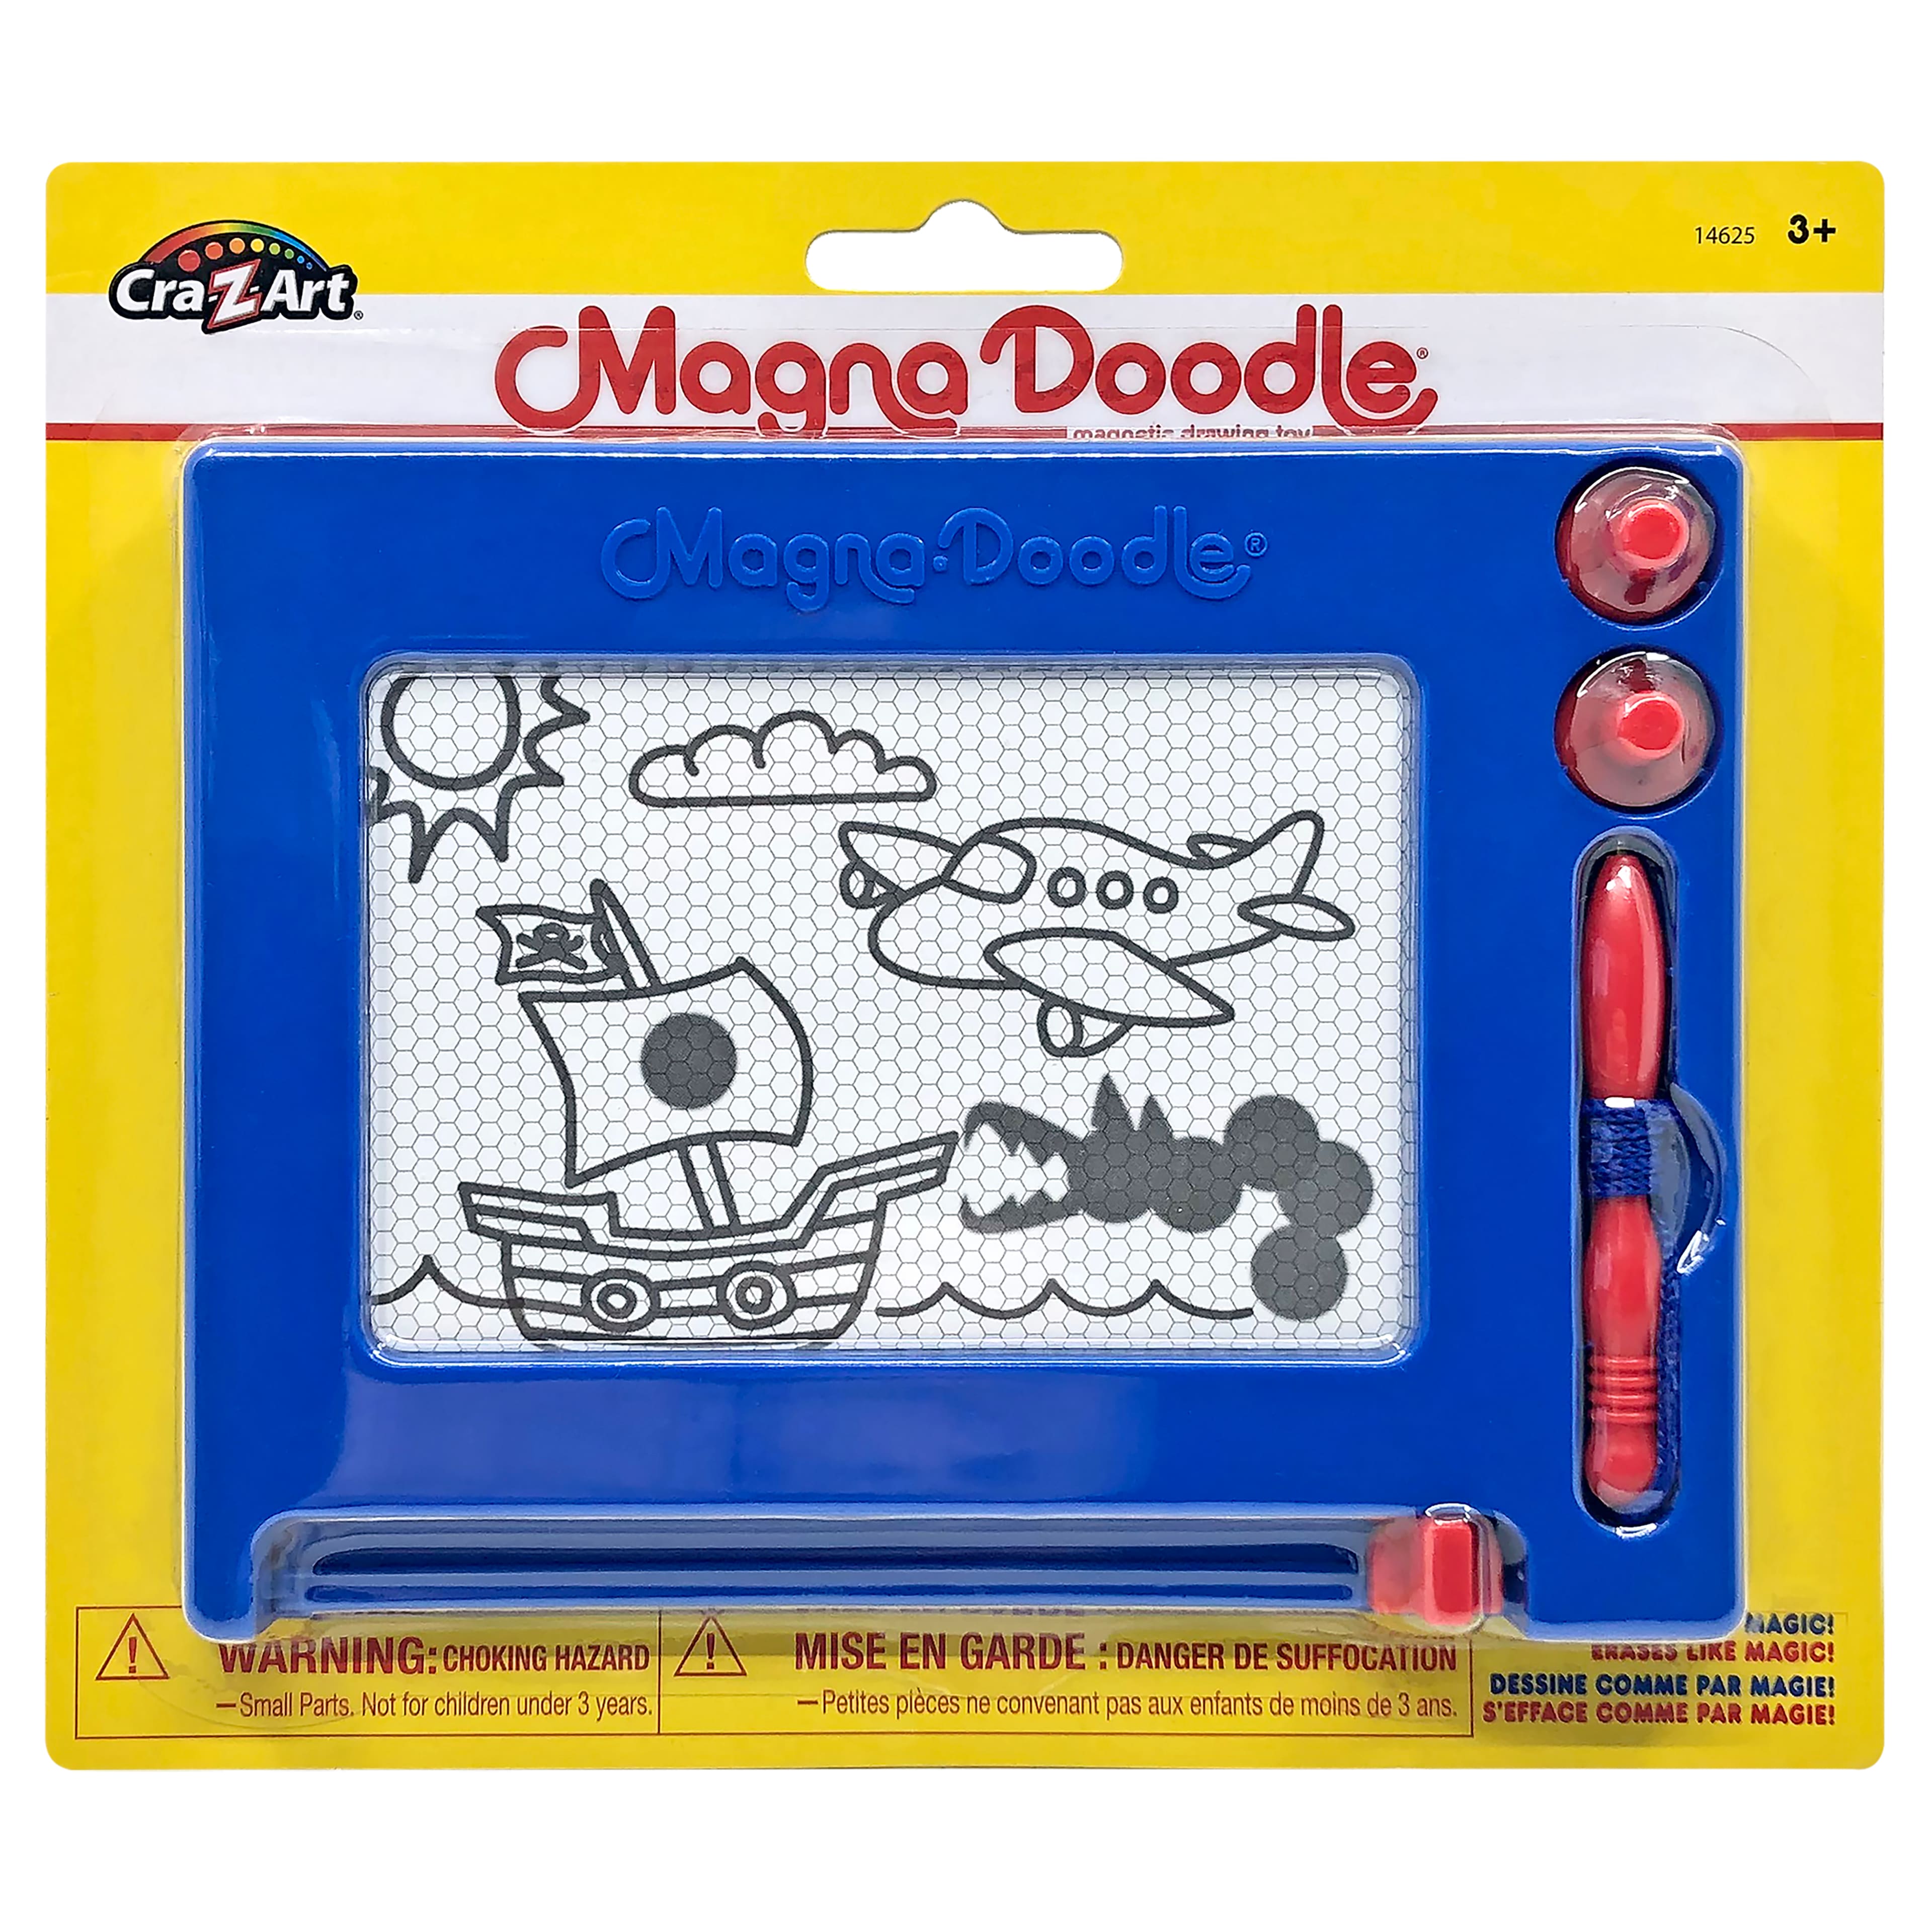 RETRO MAGNADOODLE - The Toy Insider